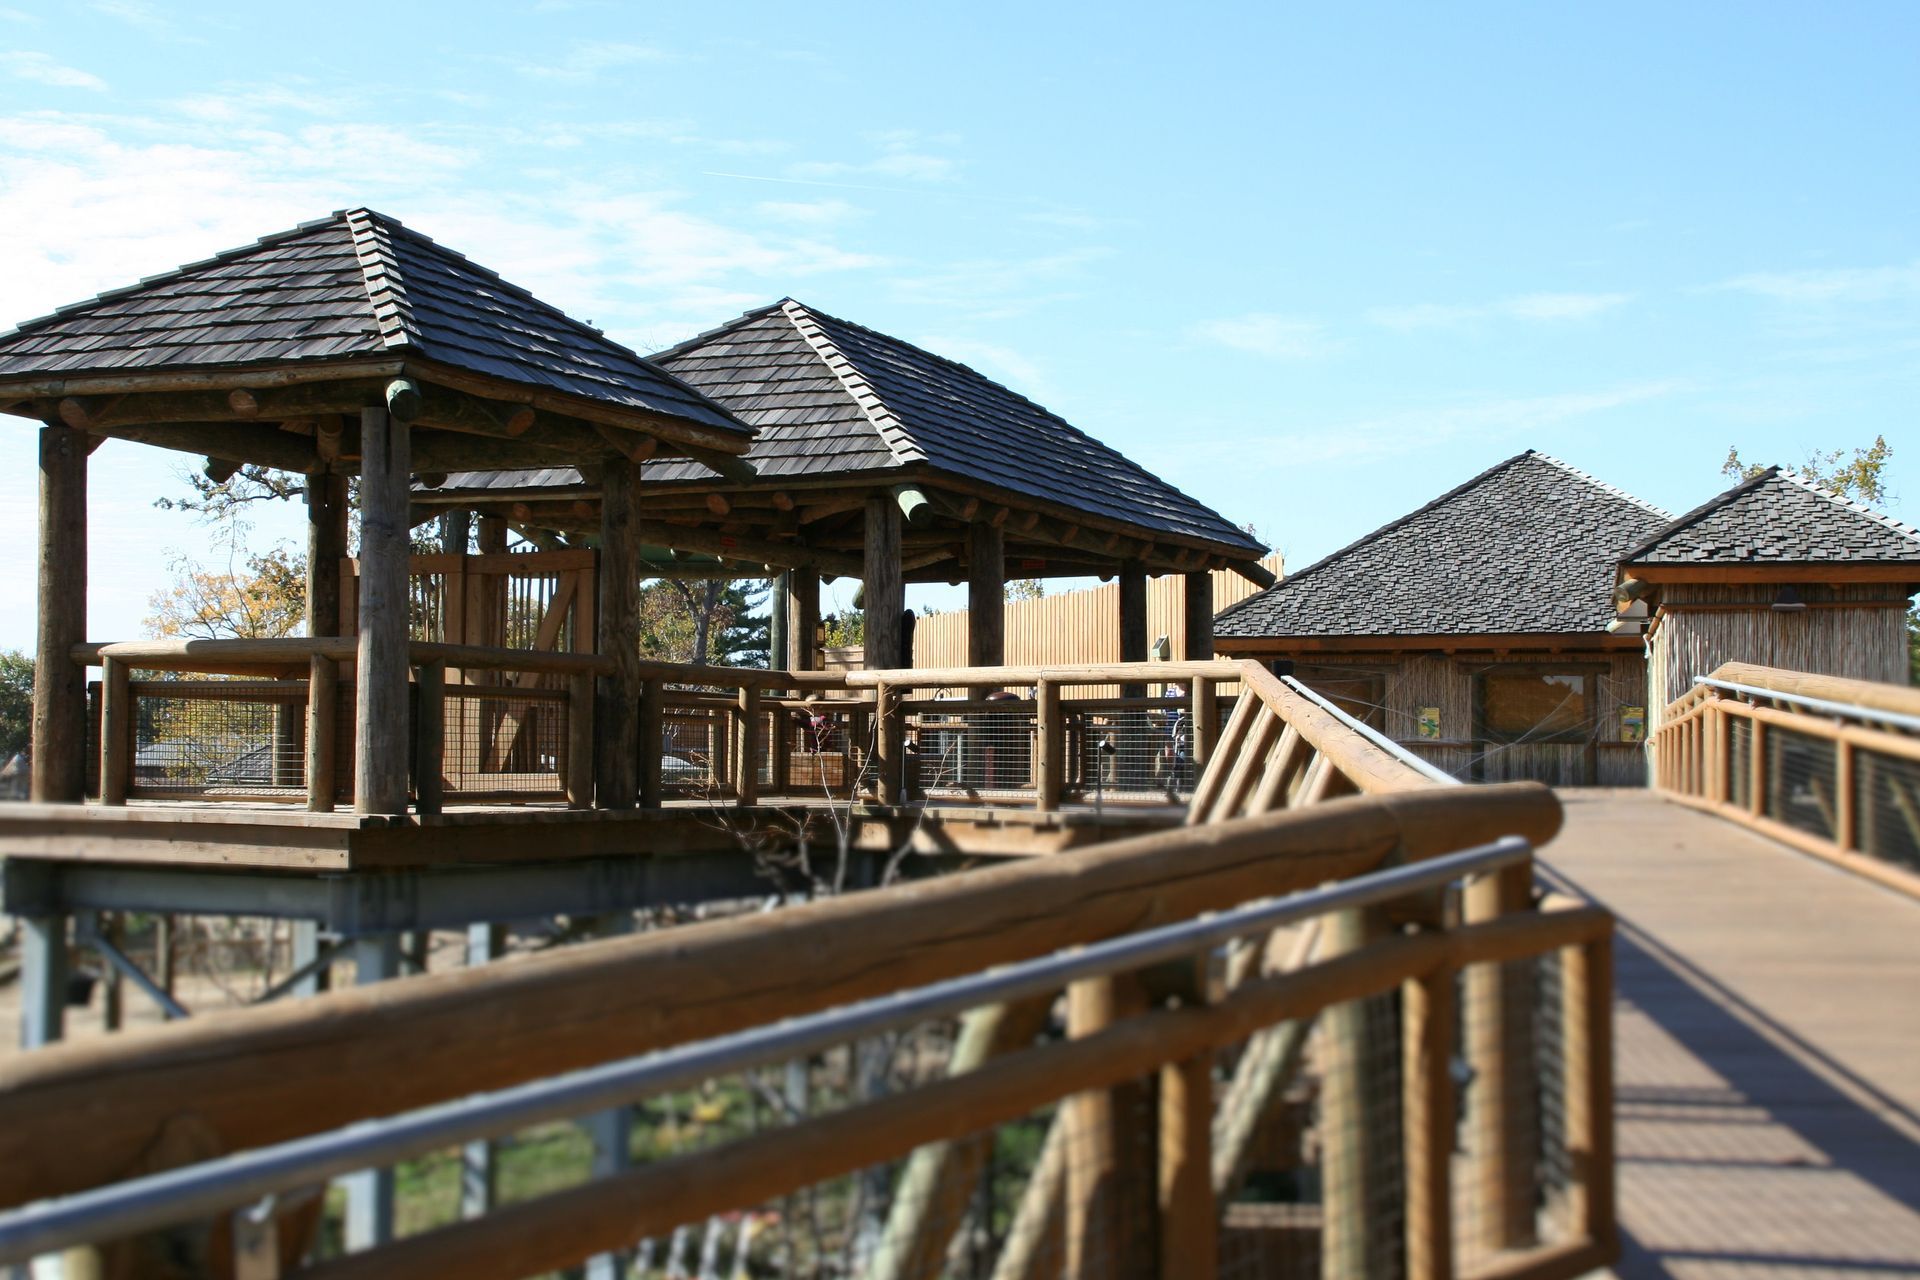 Wood Shake Roofs at Peoria Zoo